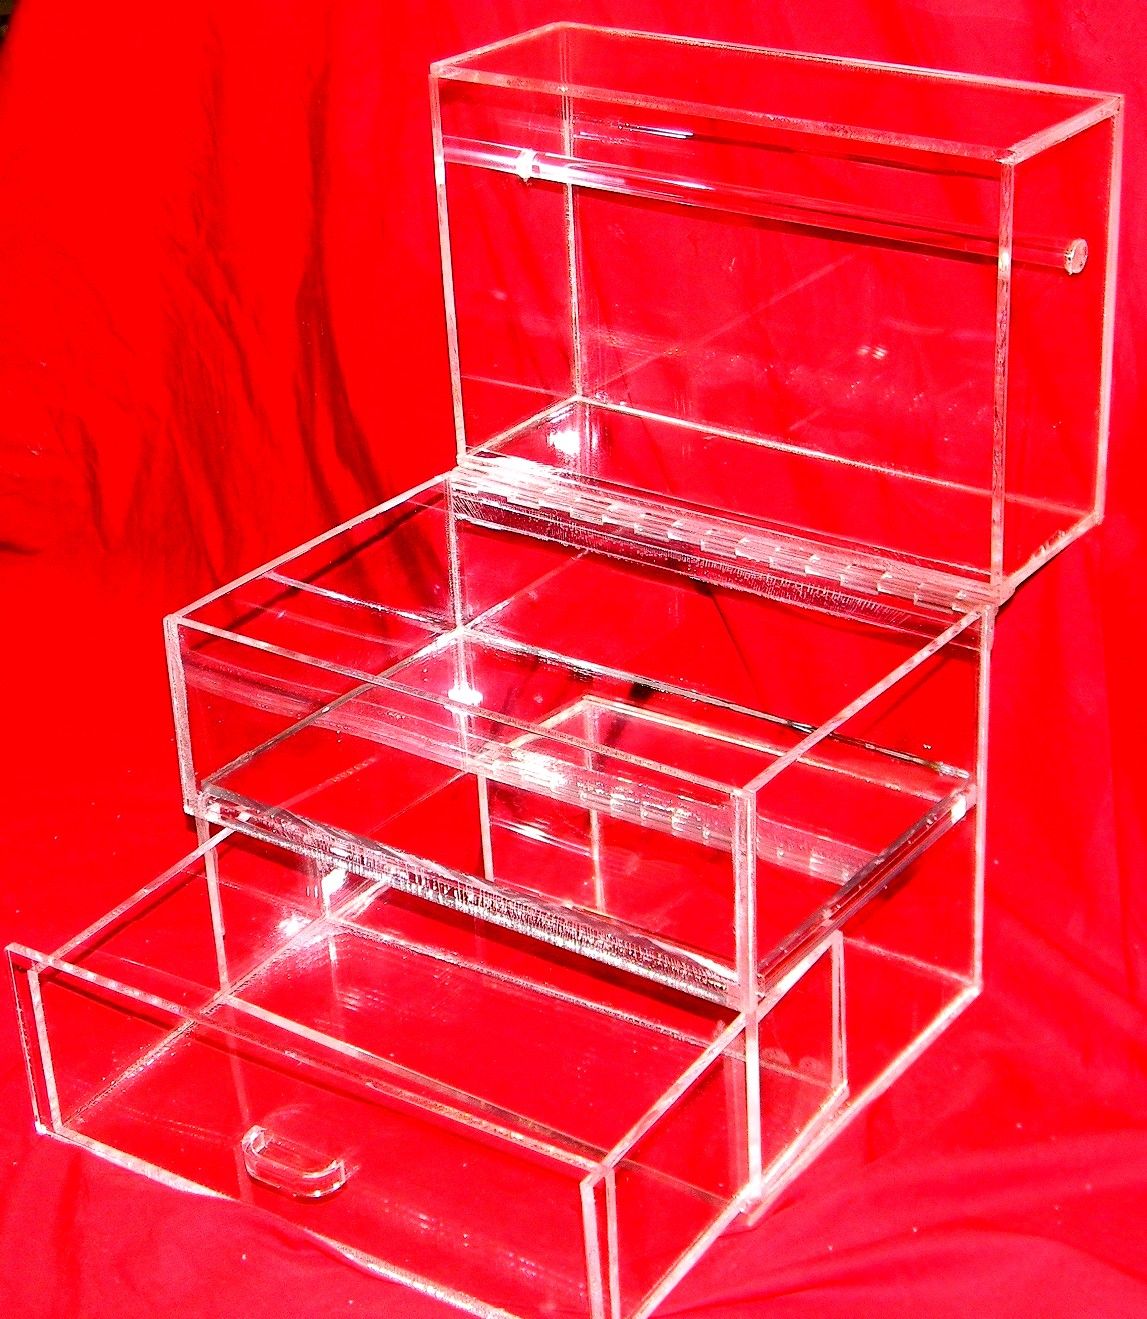 Buy Handmade Acrylic Jewelry Box - Hand Crafted, Custom Size And Colors  Available, made to order from Custom Acrylic/ Lucite Creations by Matthew  James